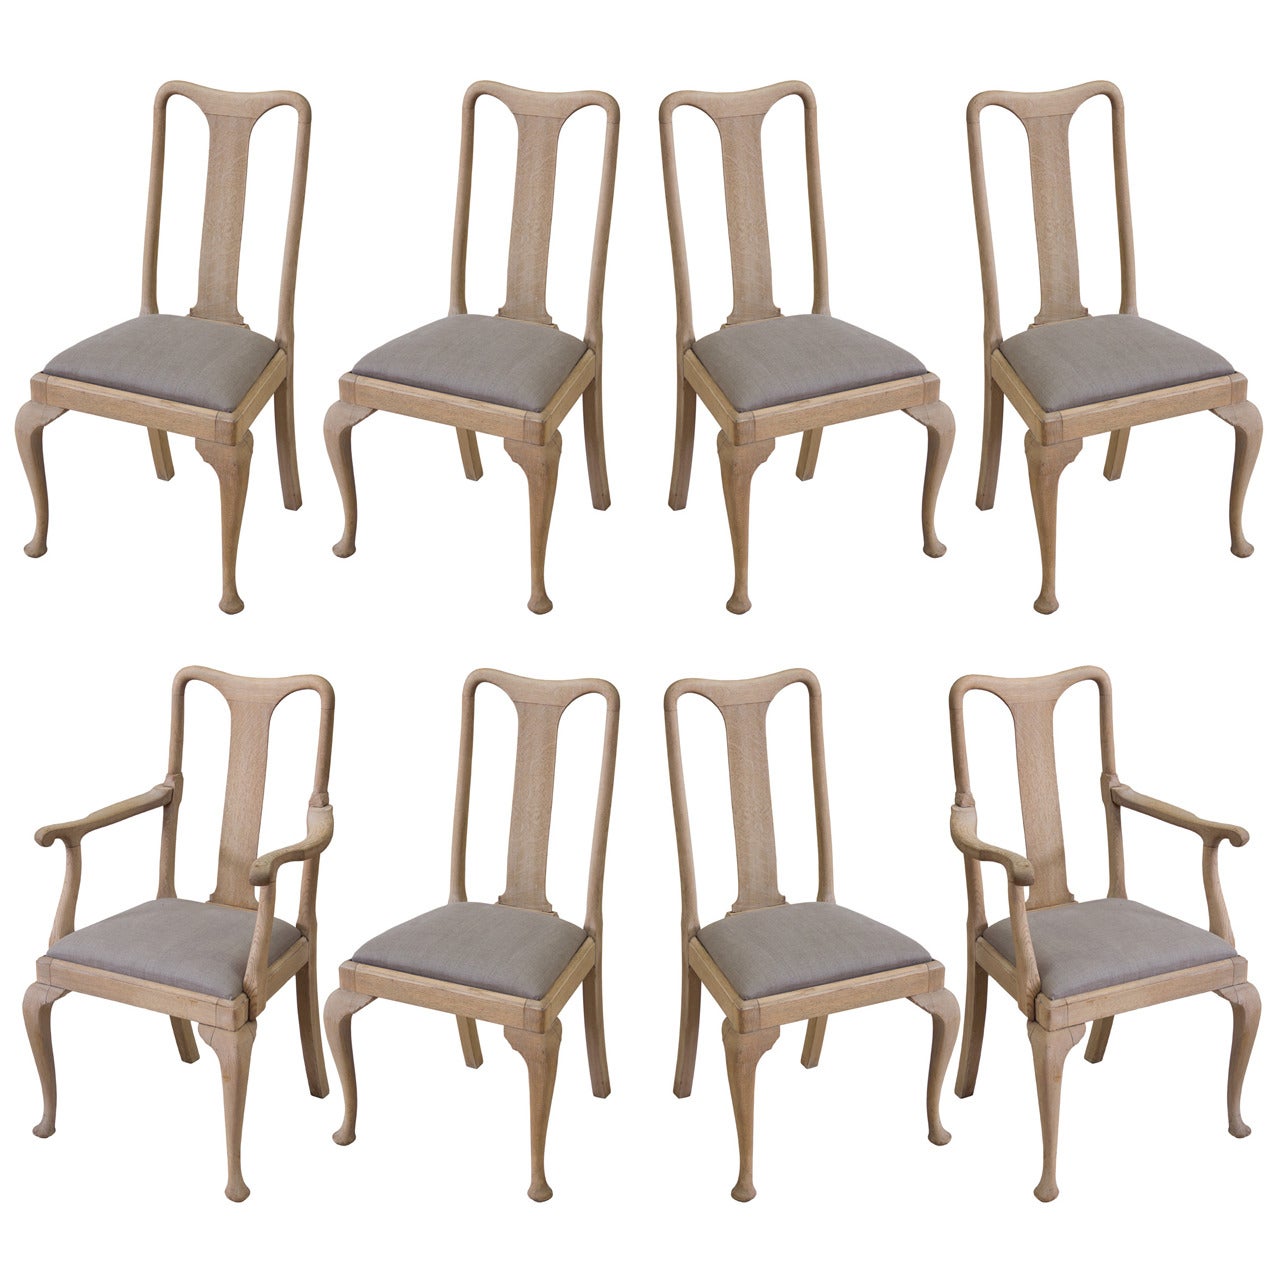 Set of 8 1920s Queen Anne Style Chairs